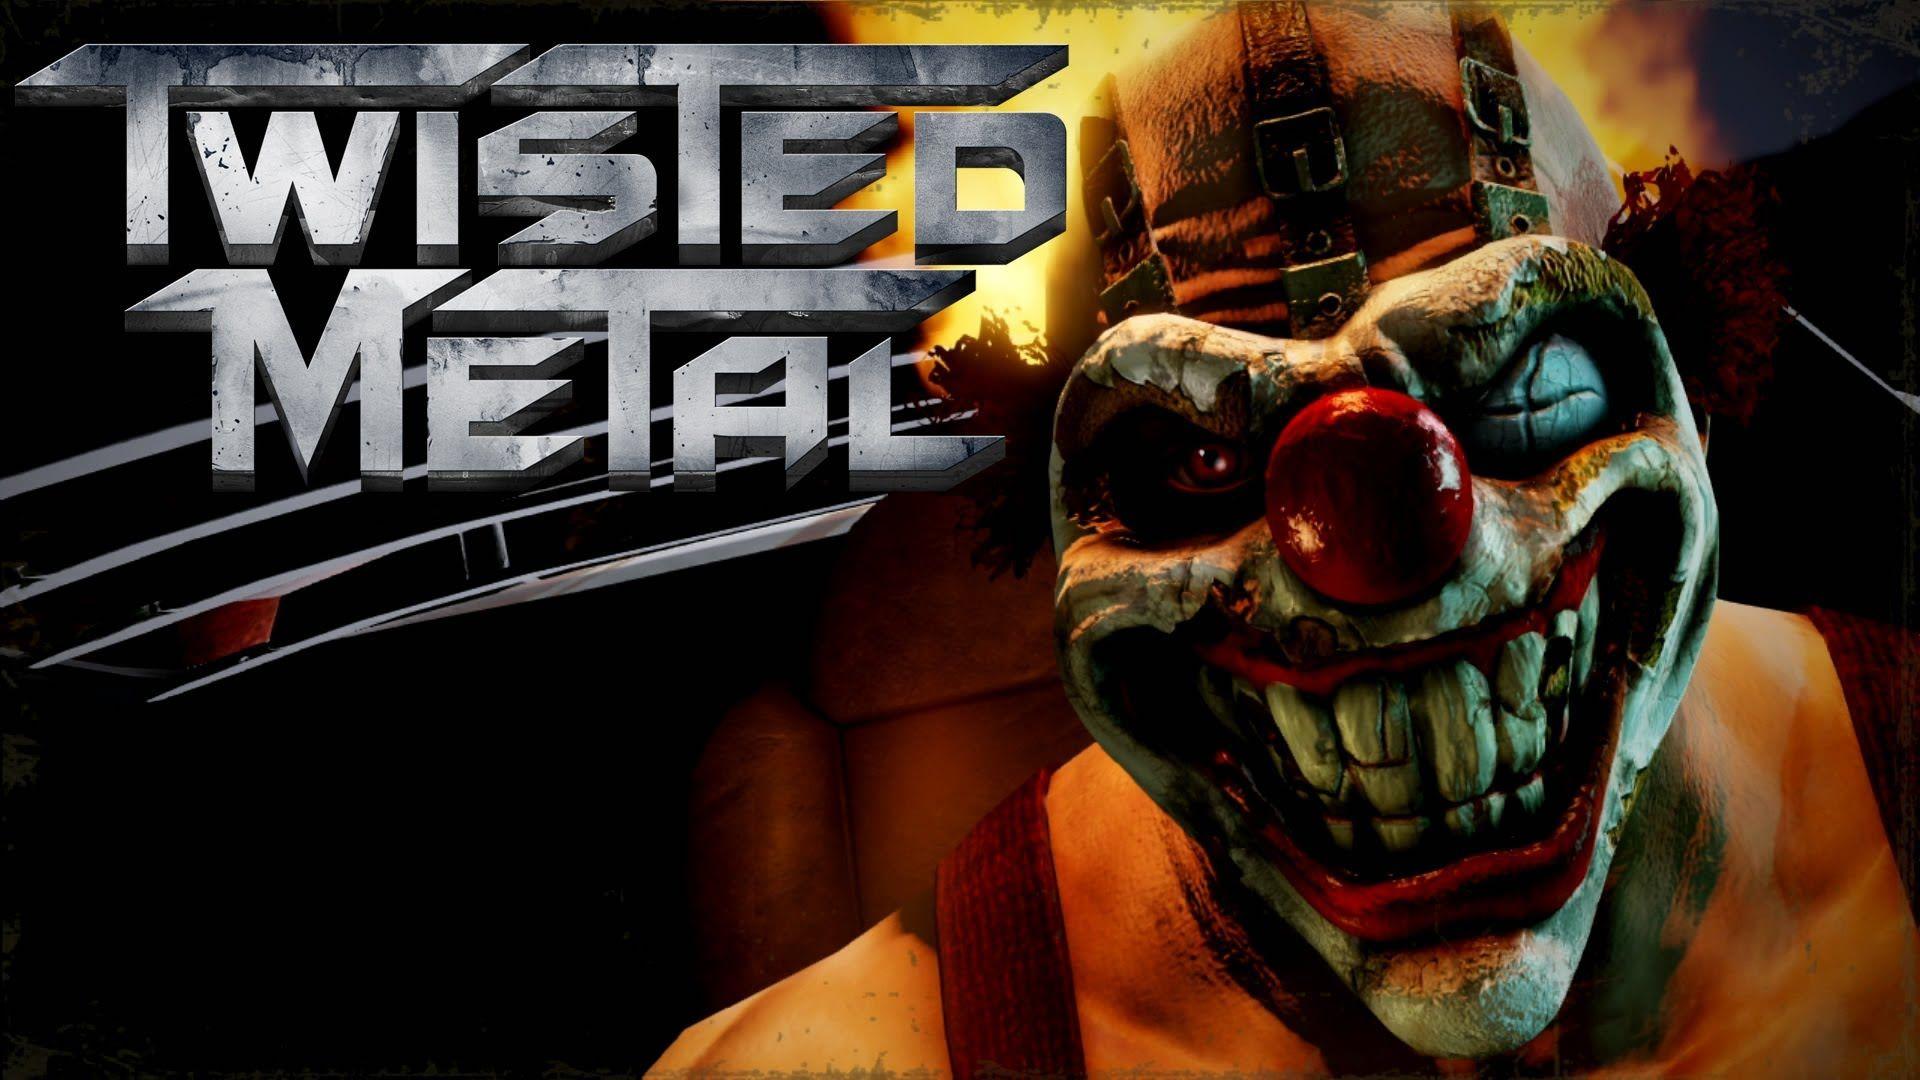 download twisted metal black ps3